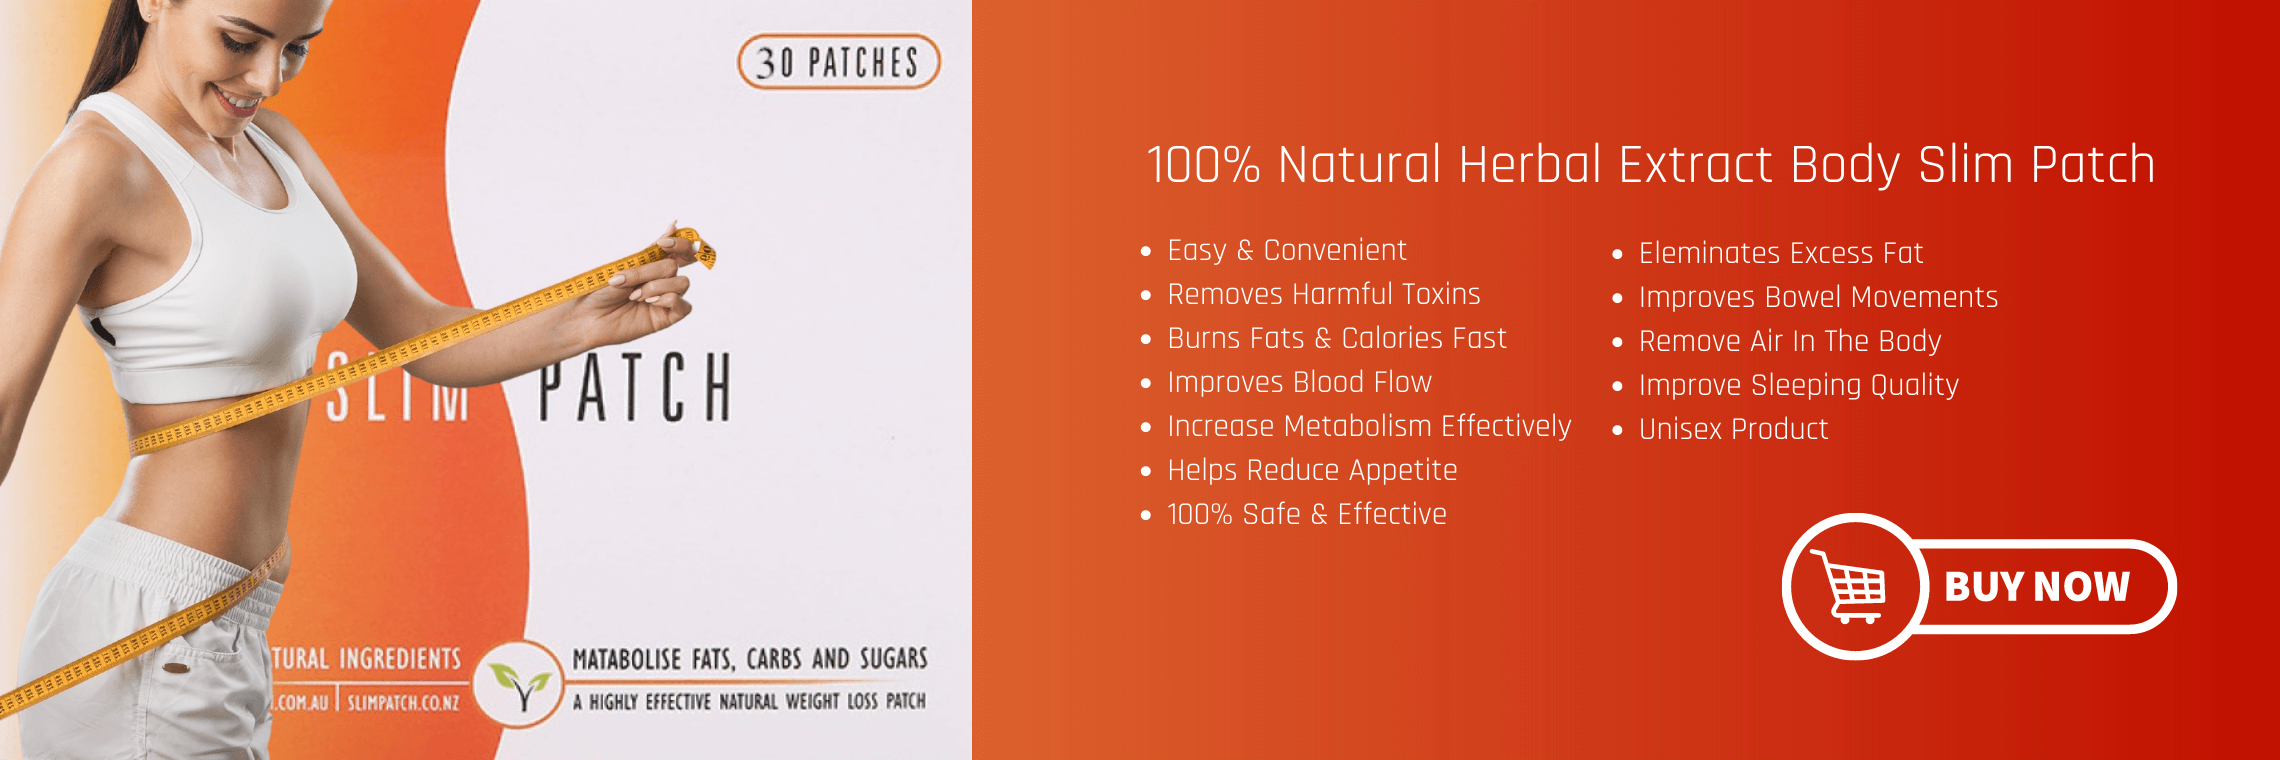 natural slimming patch